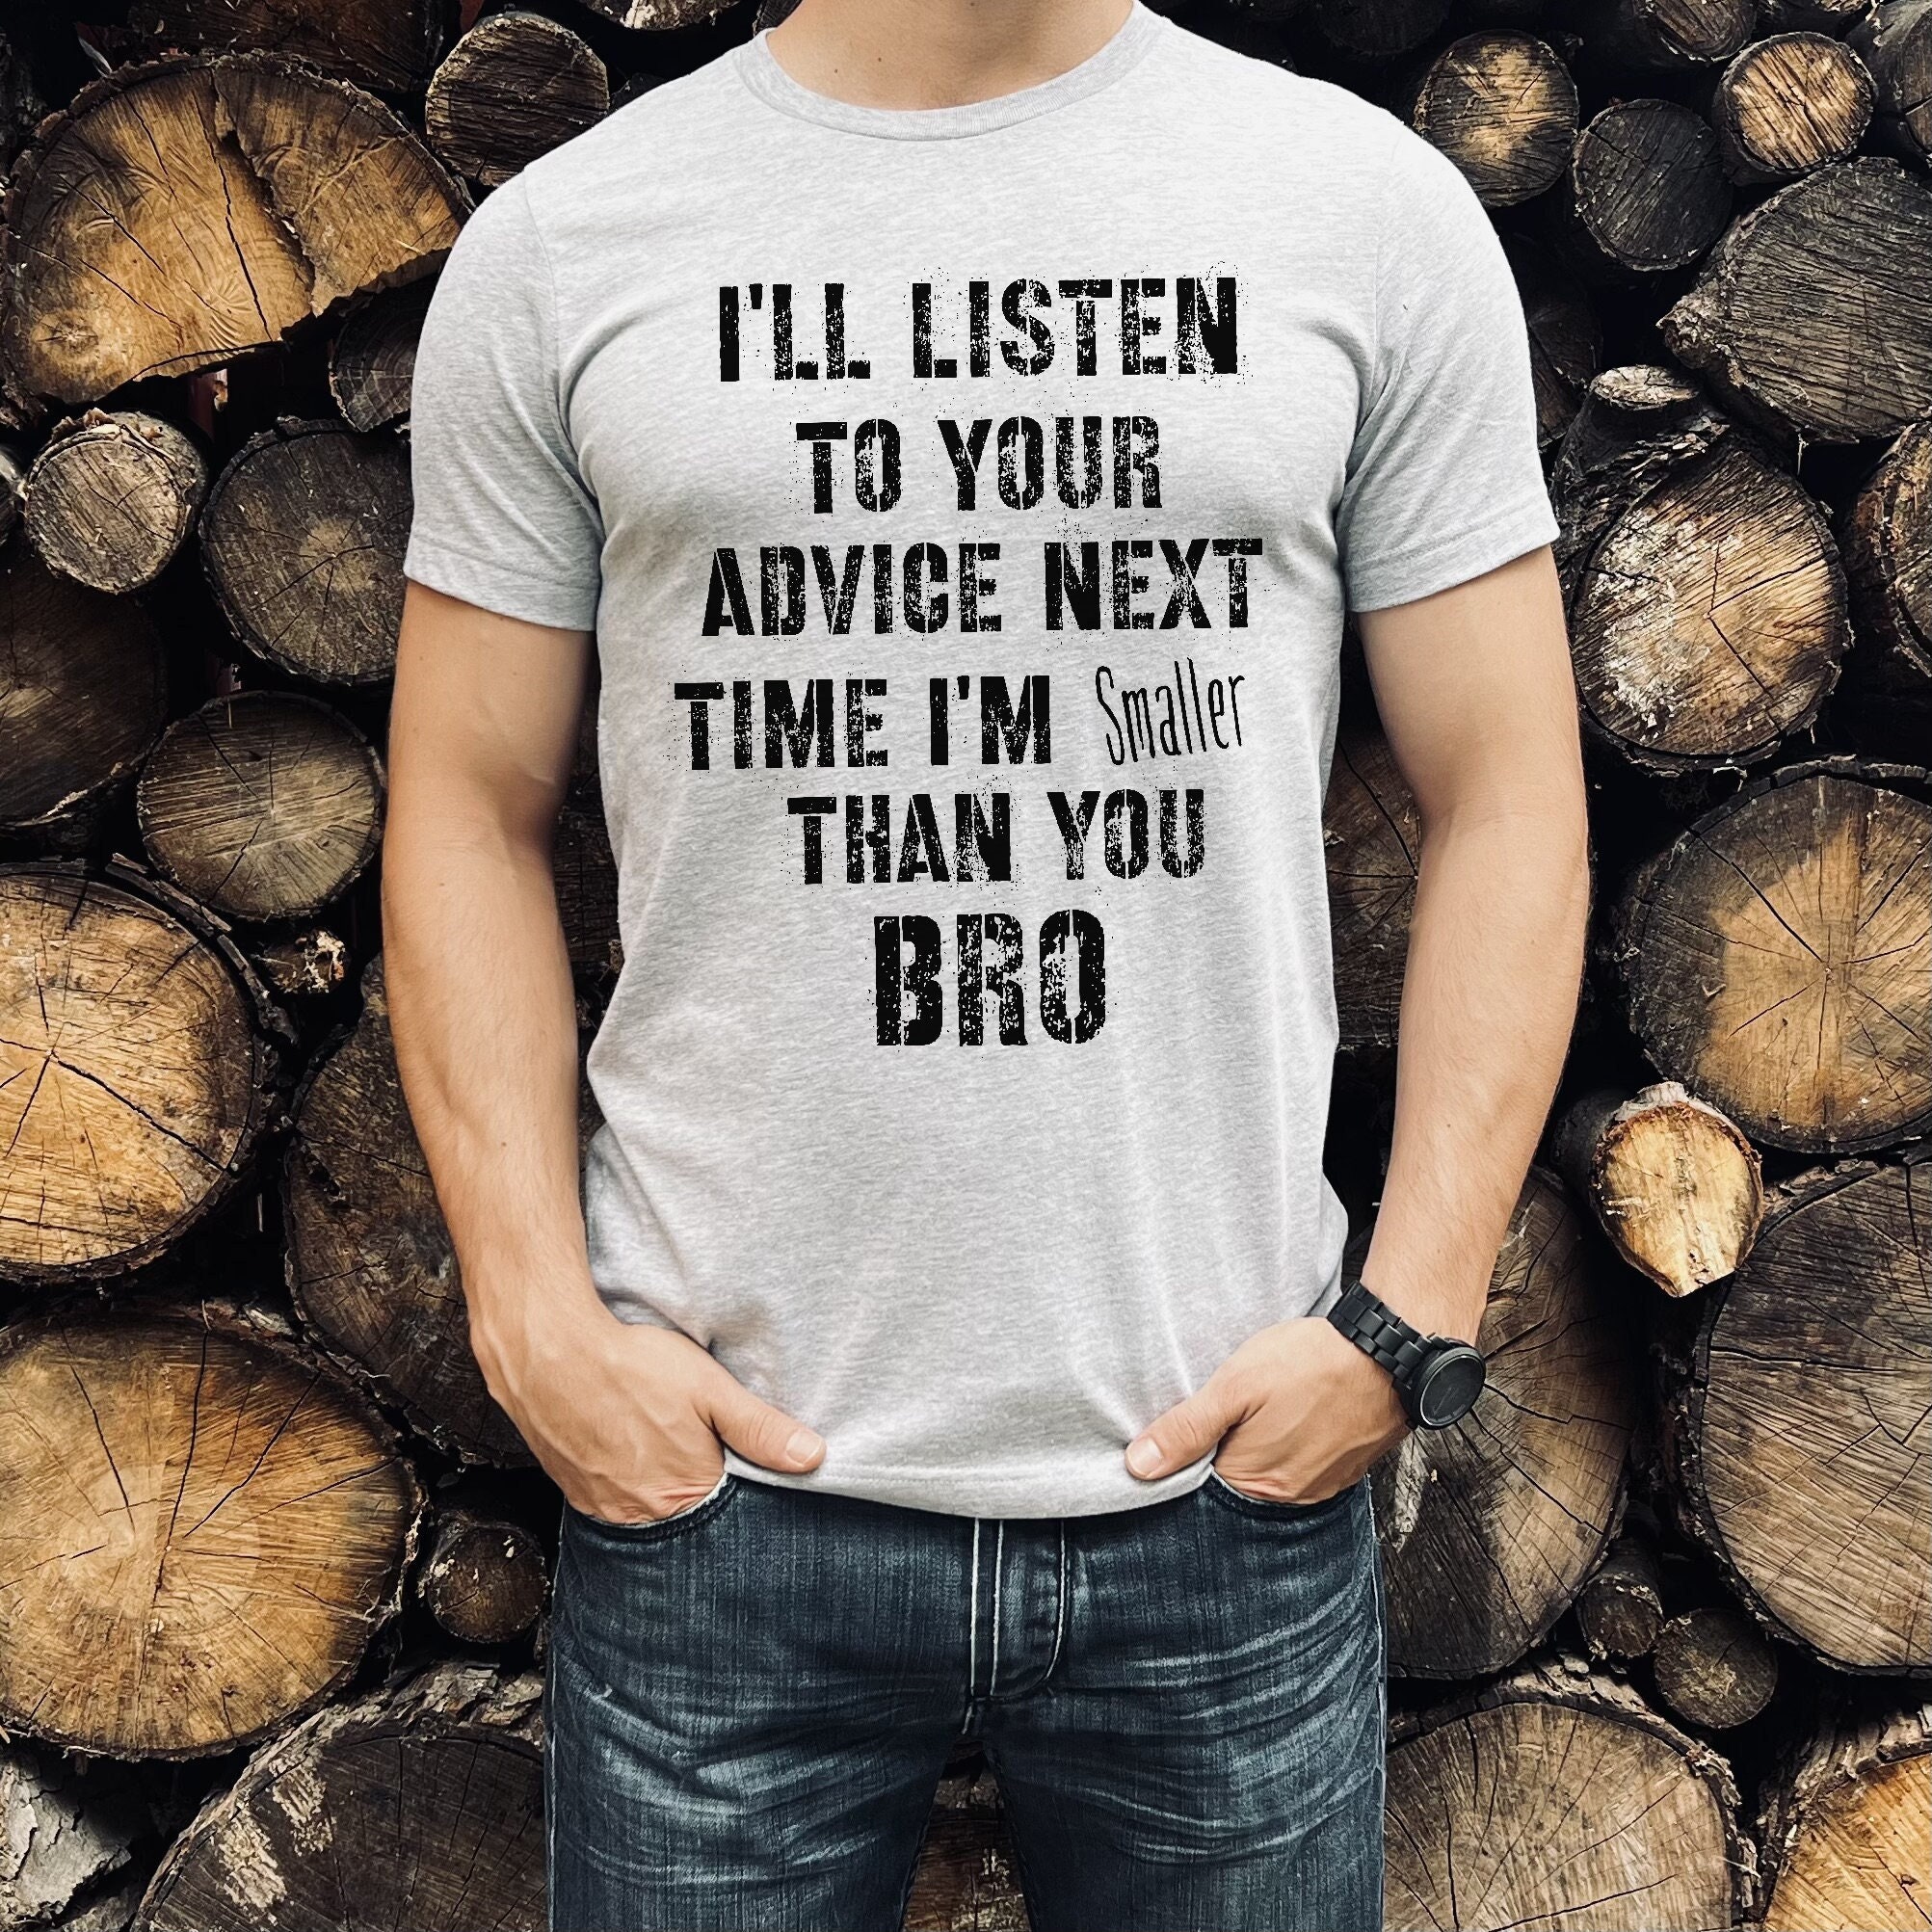 I'll Listen Next Time Shirt, Funny Workout Shirt, Funny Gym Shirt, Gym Rat Tee, Workout Gifts, Bro Shirt, Weight Lifter Tee, Brother Gift